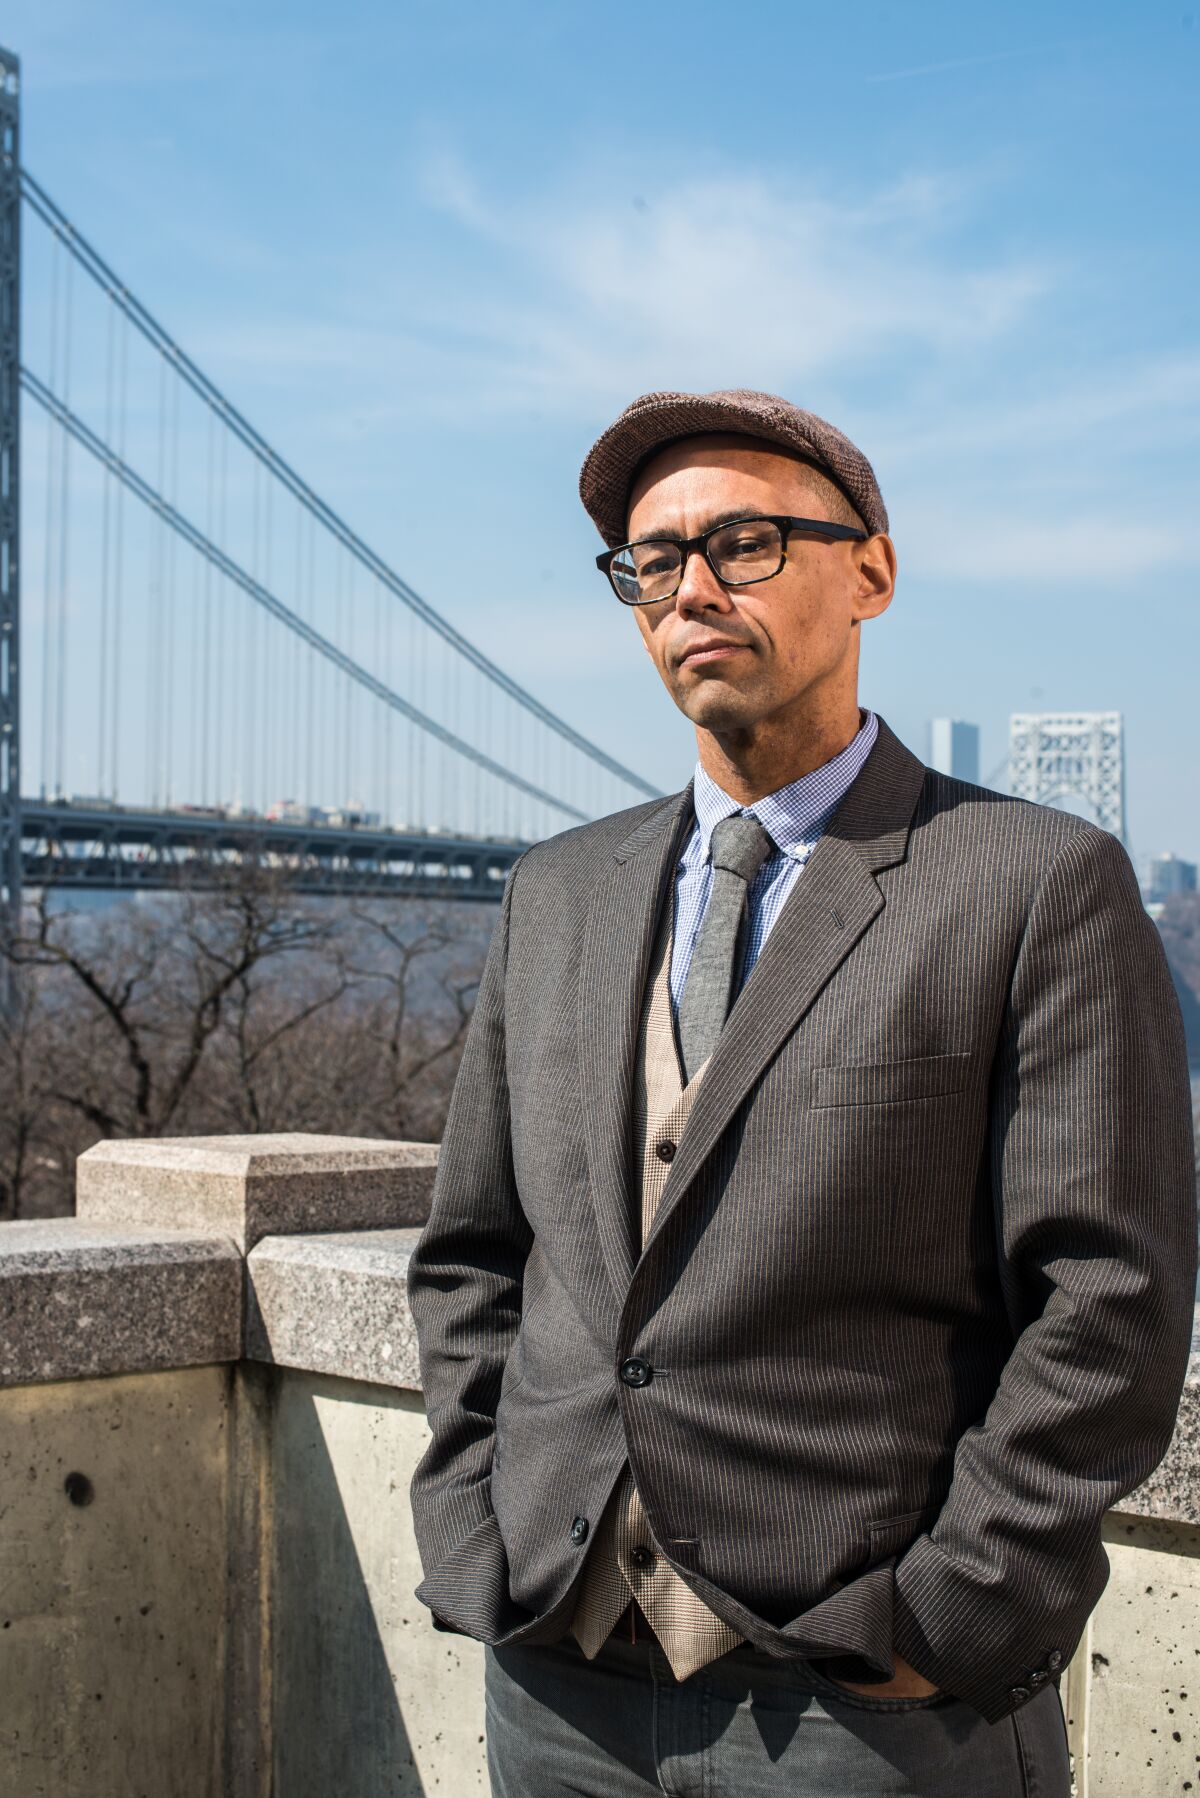 Victor LaValle wearing a suit and newsboy cap in front of a suspension bridge